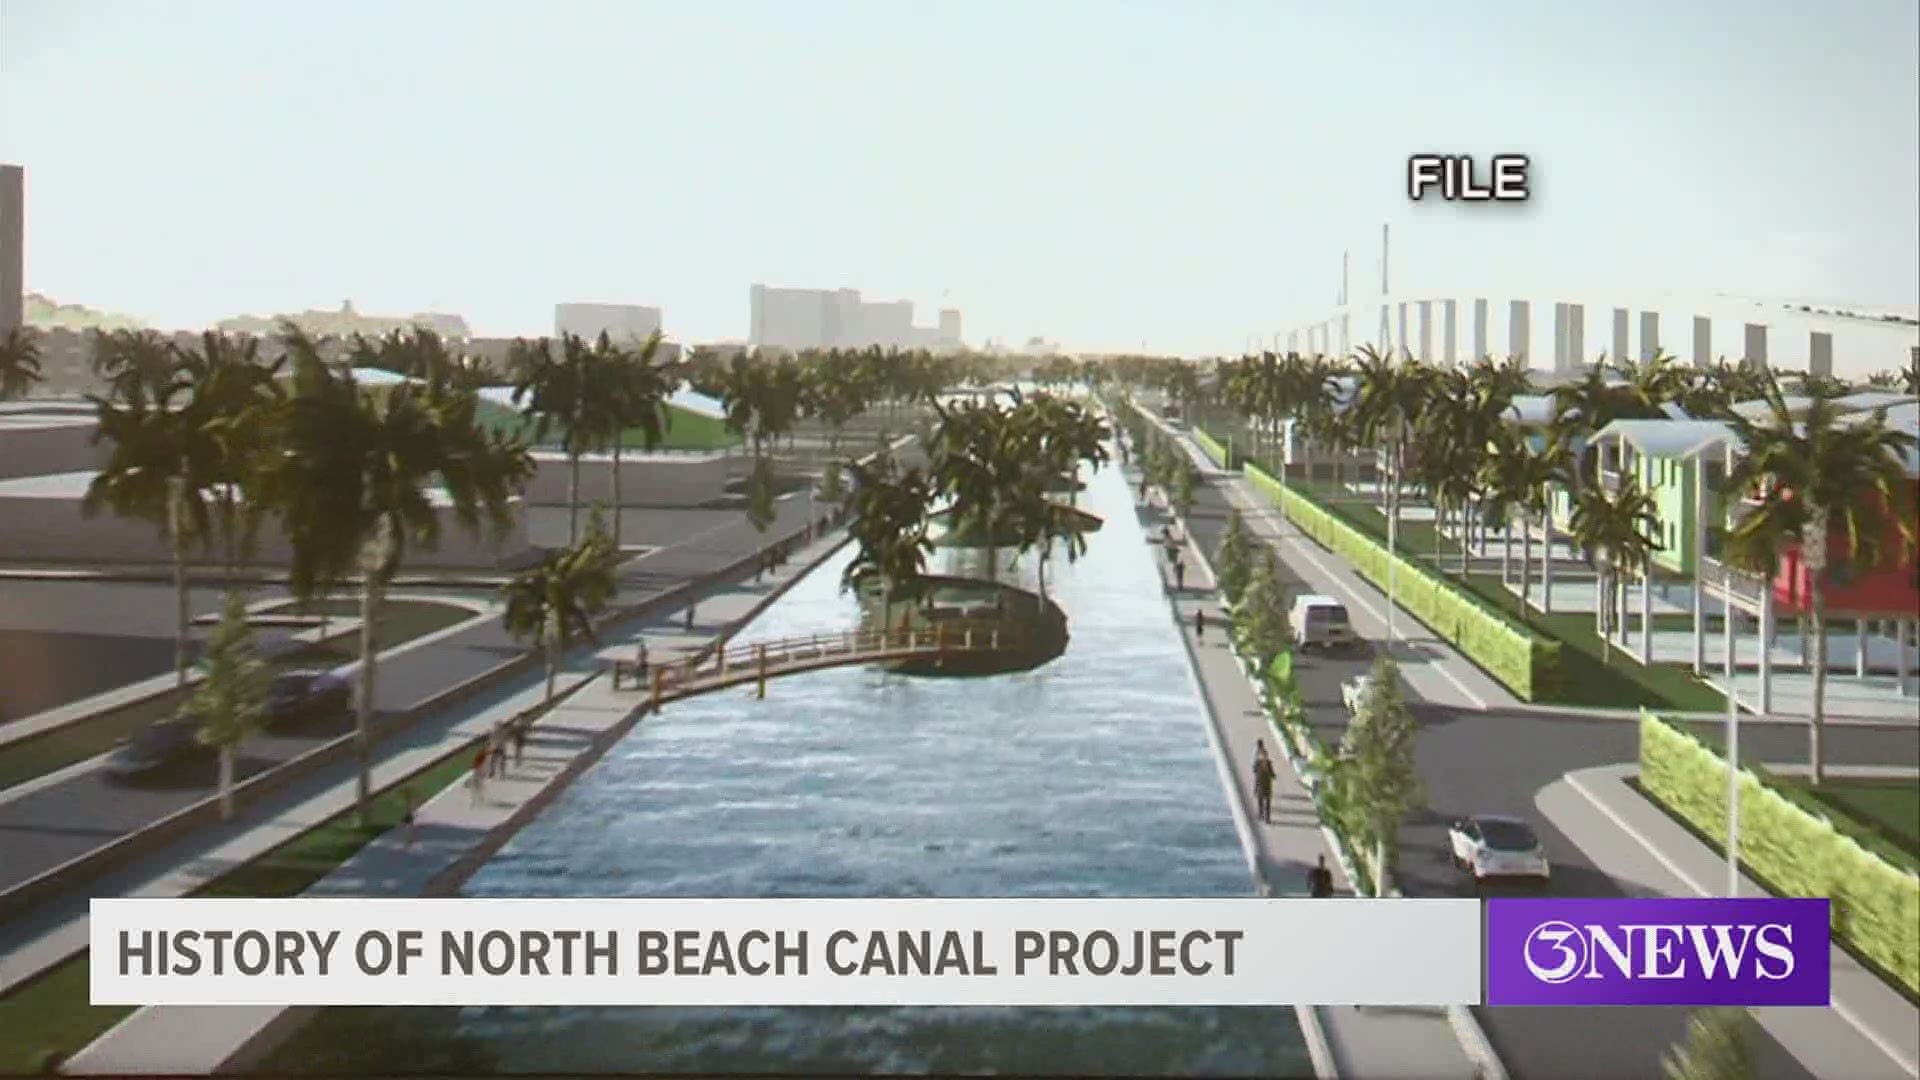 In June the City of Corpus Christi approved to hire a firm to conduct a study and design the canal. Here's the latest update.